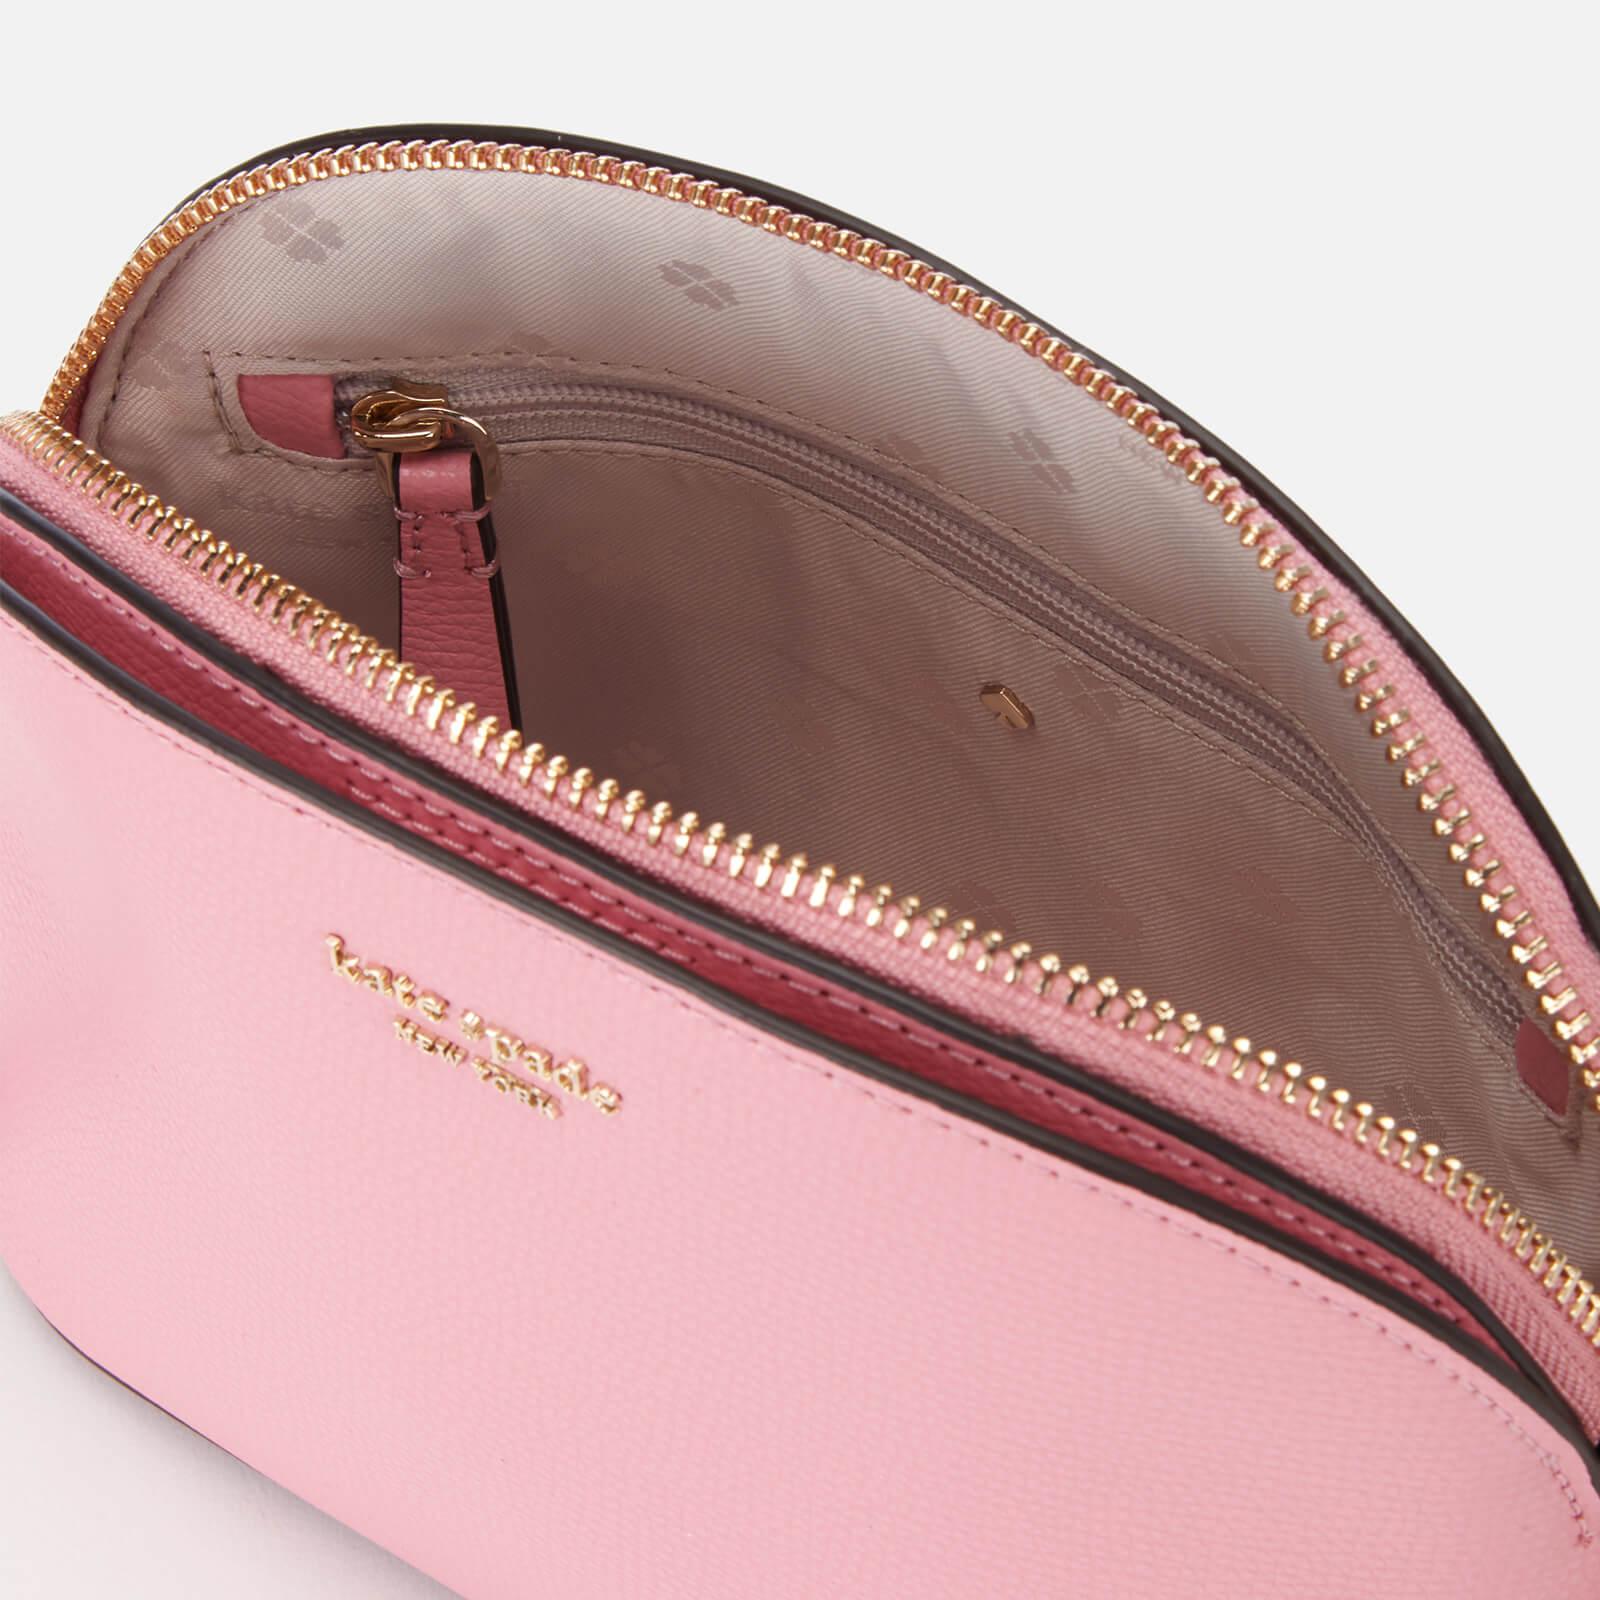 Leather crossbody bag Kate Spade Pink in Leather - 32013532